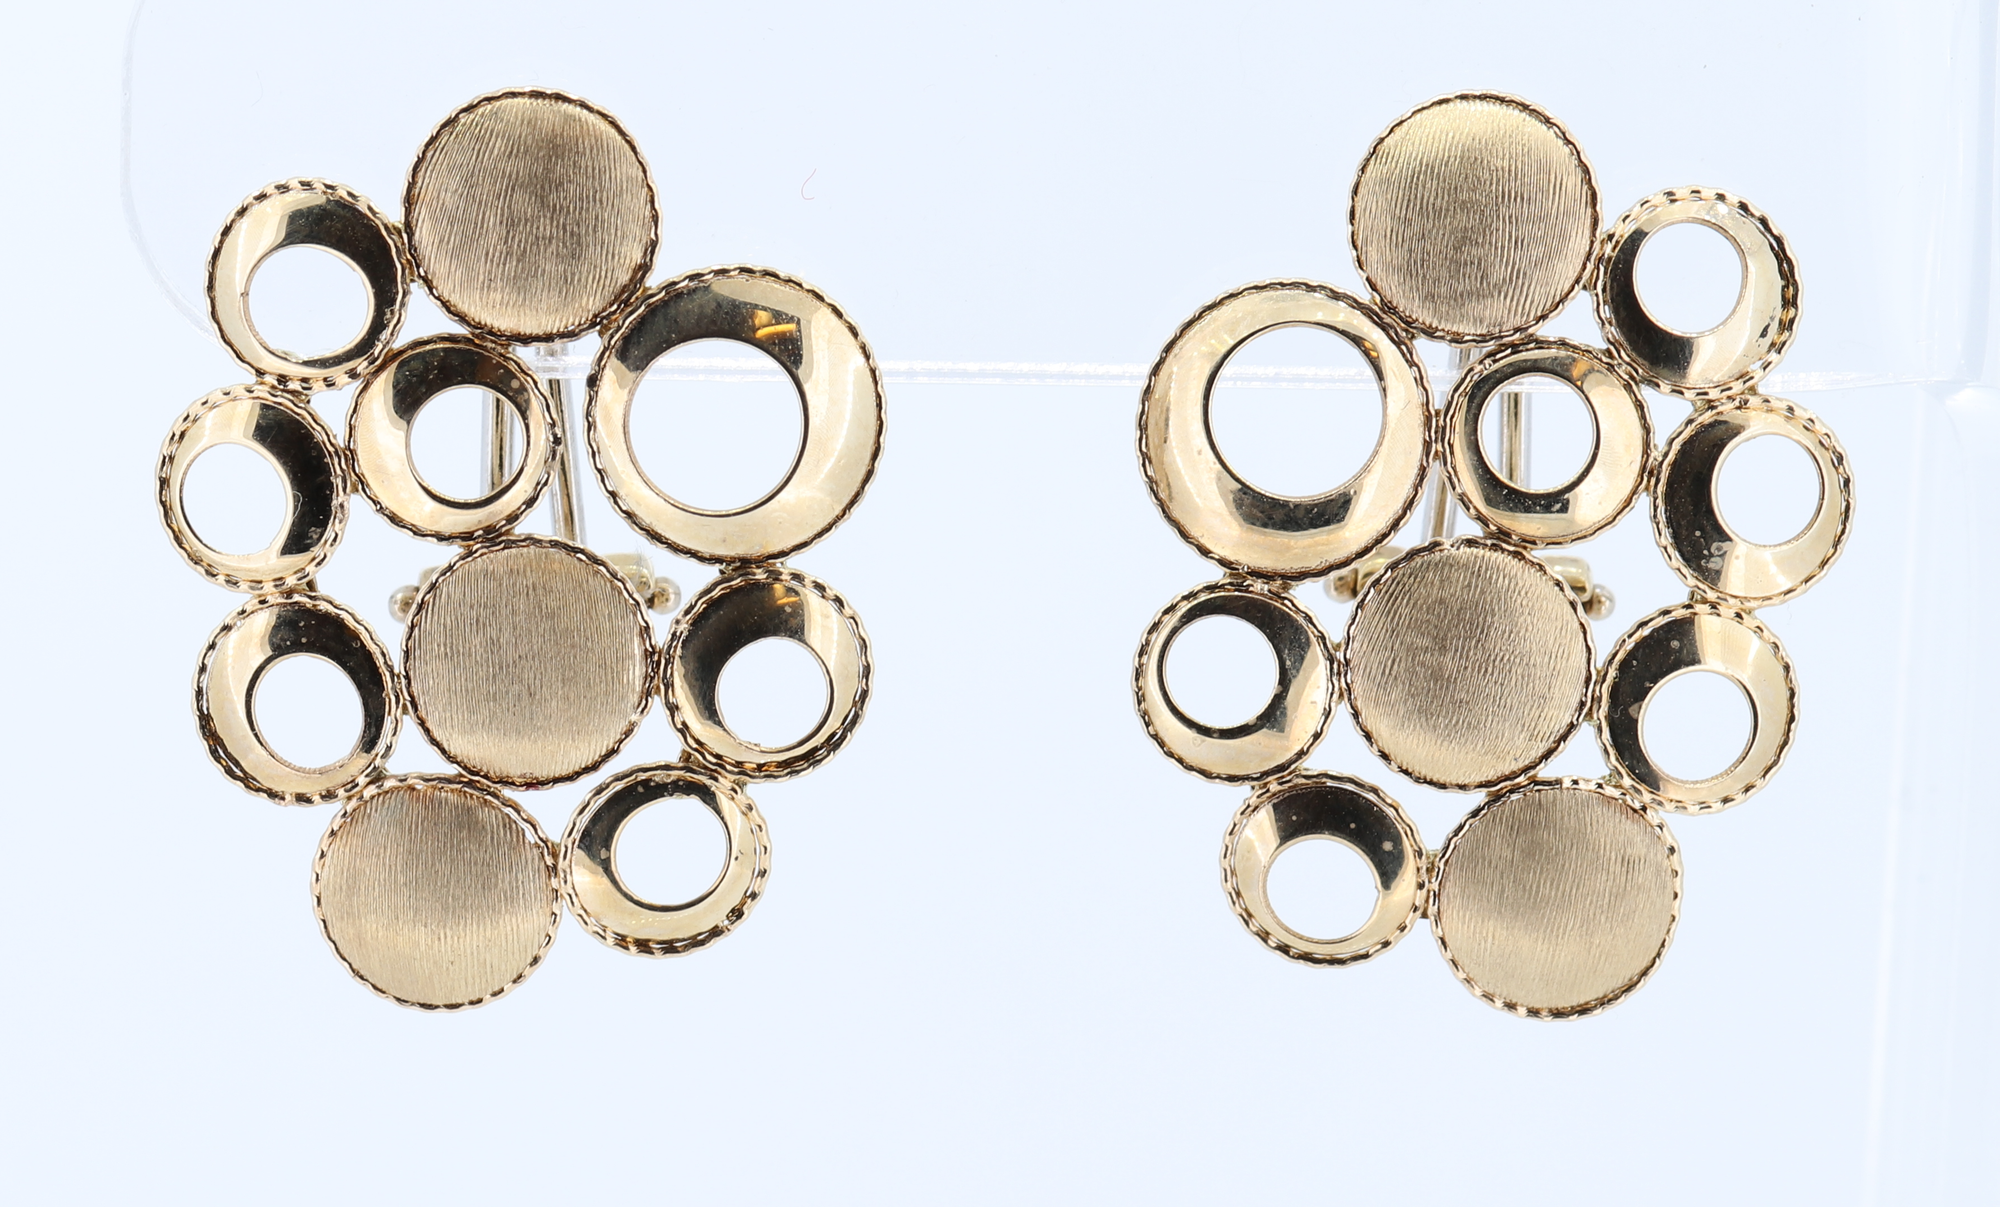 Fancy Earrings In High-Polish And Satin Finish 14kt Yellow Gold